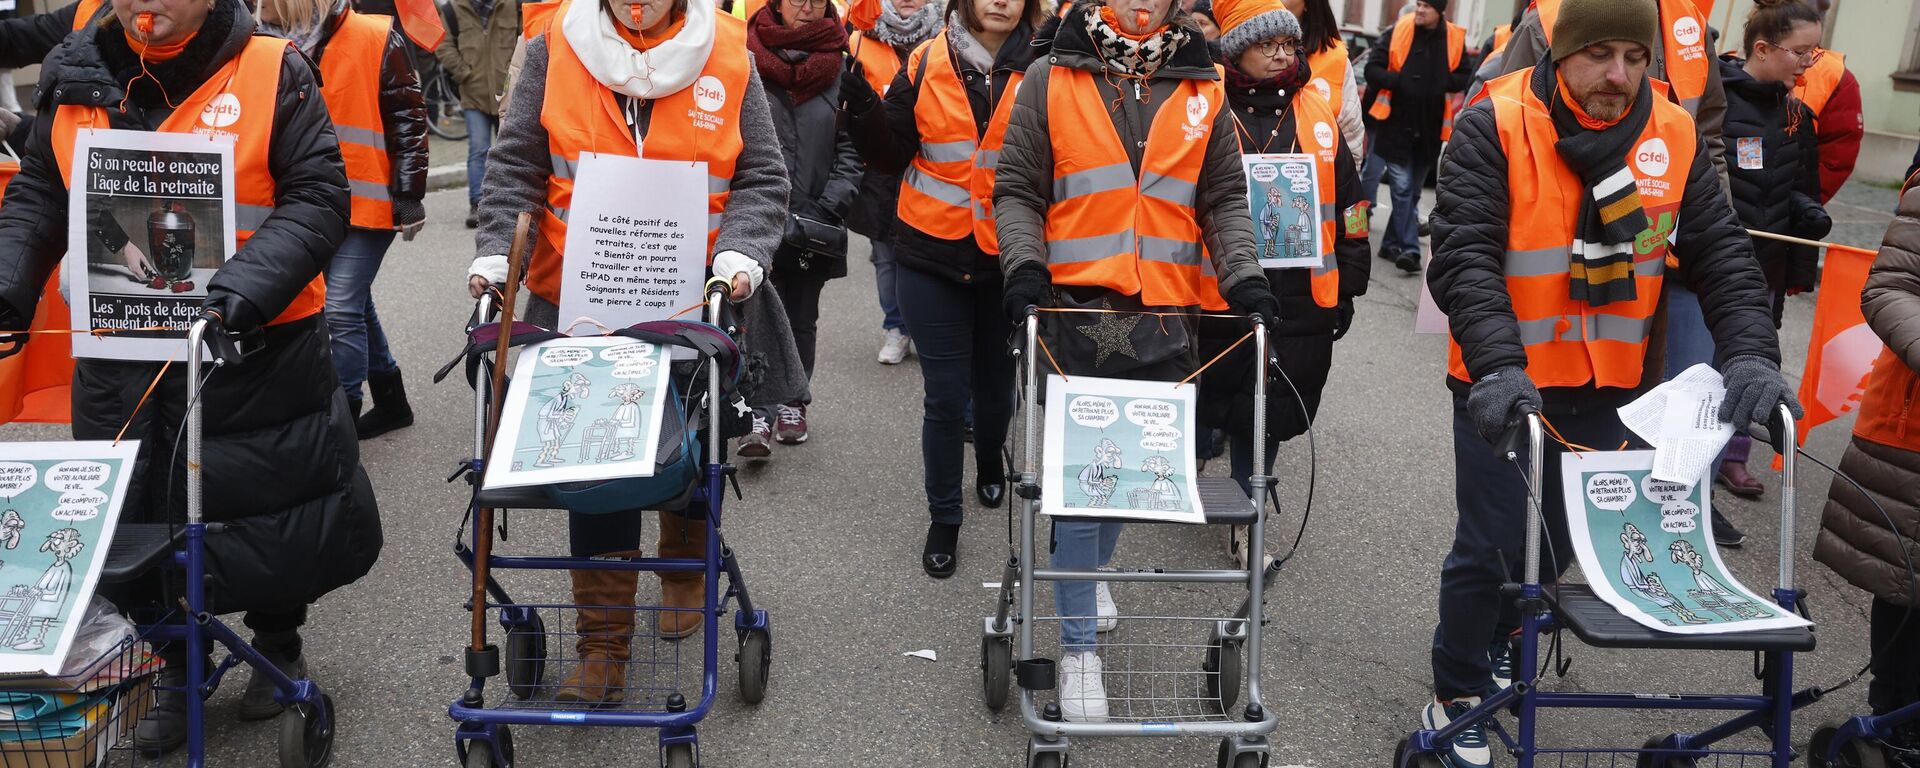 Protestors march with walkers as they demonstrate against proposed pension changes,Thursday, Jan. 19, 2023 in Strasbourg, eastern France.  - Sputnik International, 1920, 11.02.2023